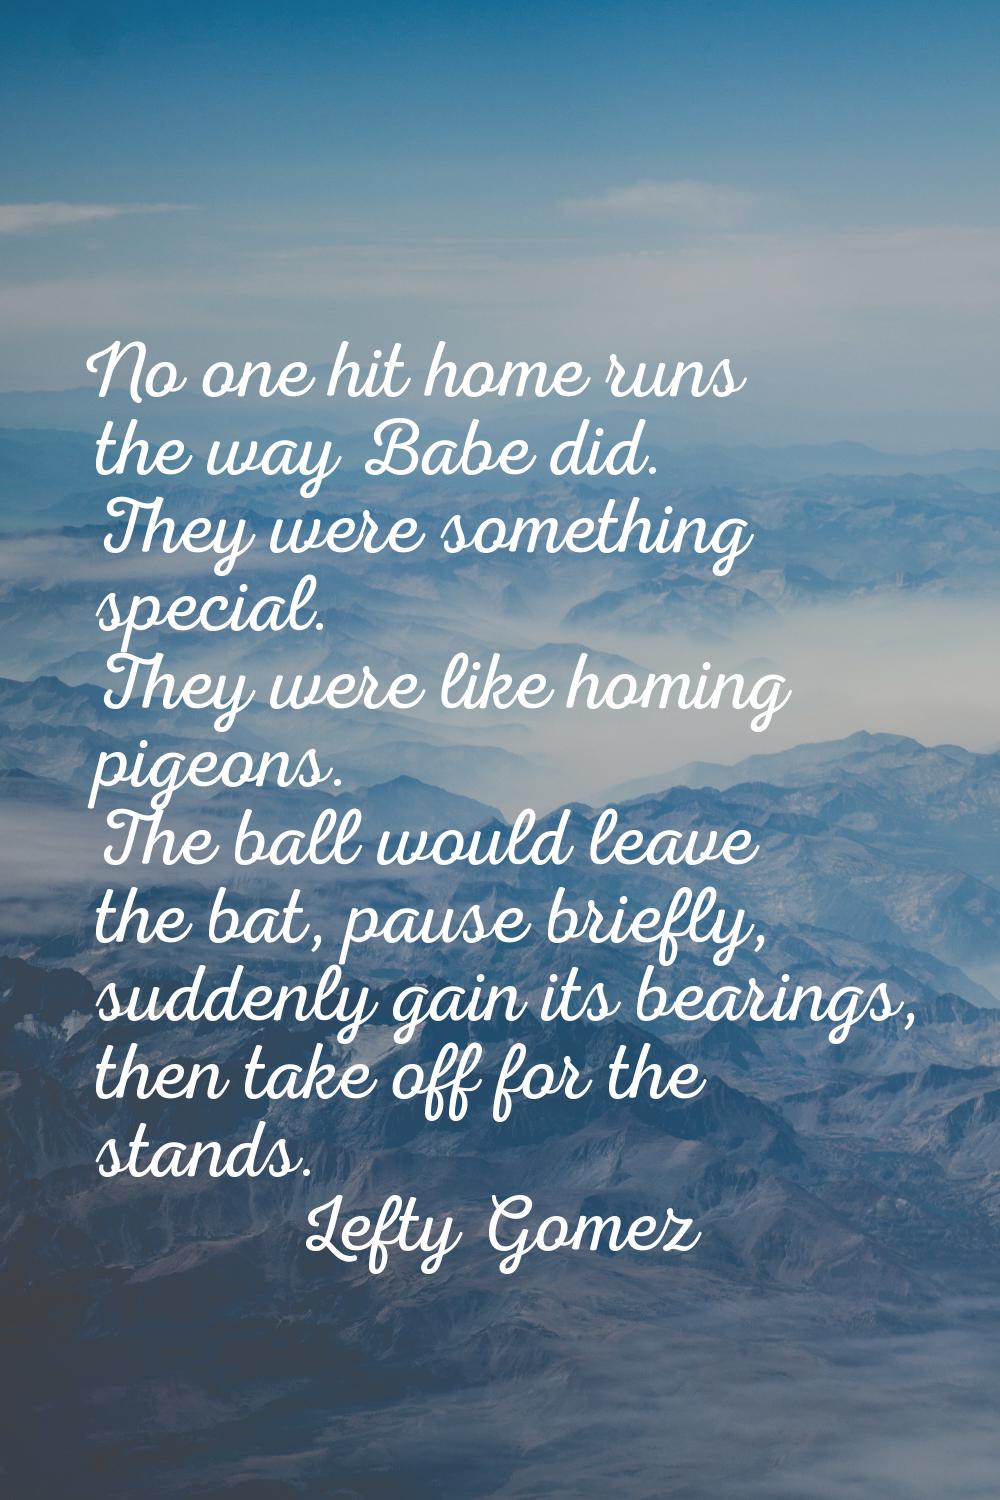 No one hit home runs the way Babe did. They were something special. They were like homing pigeons. 